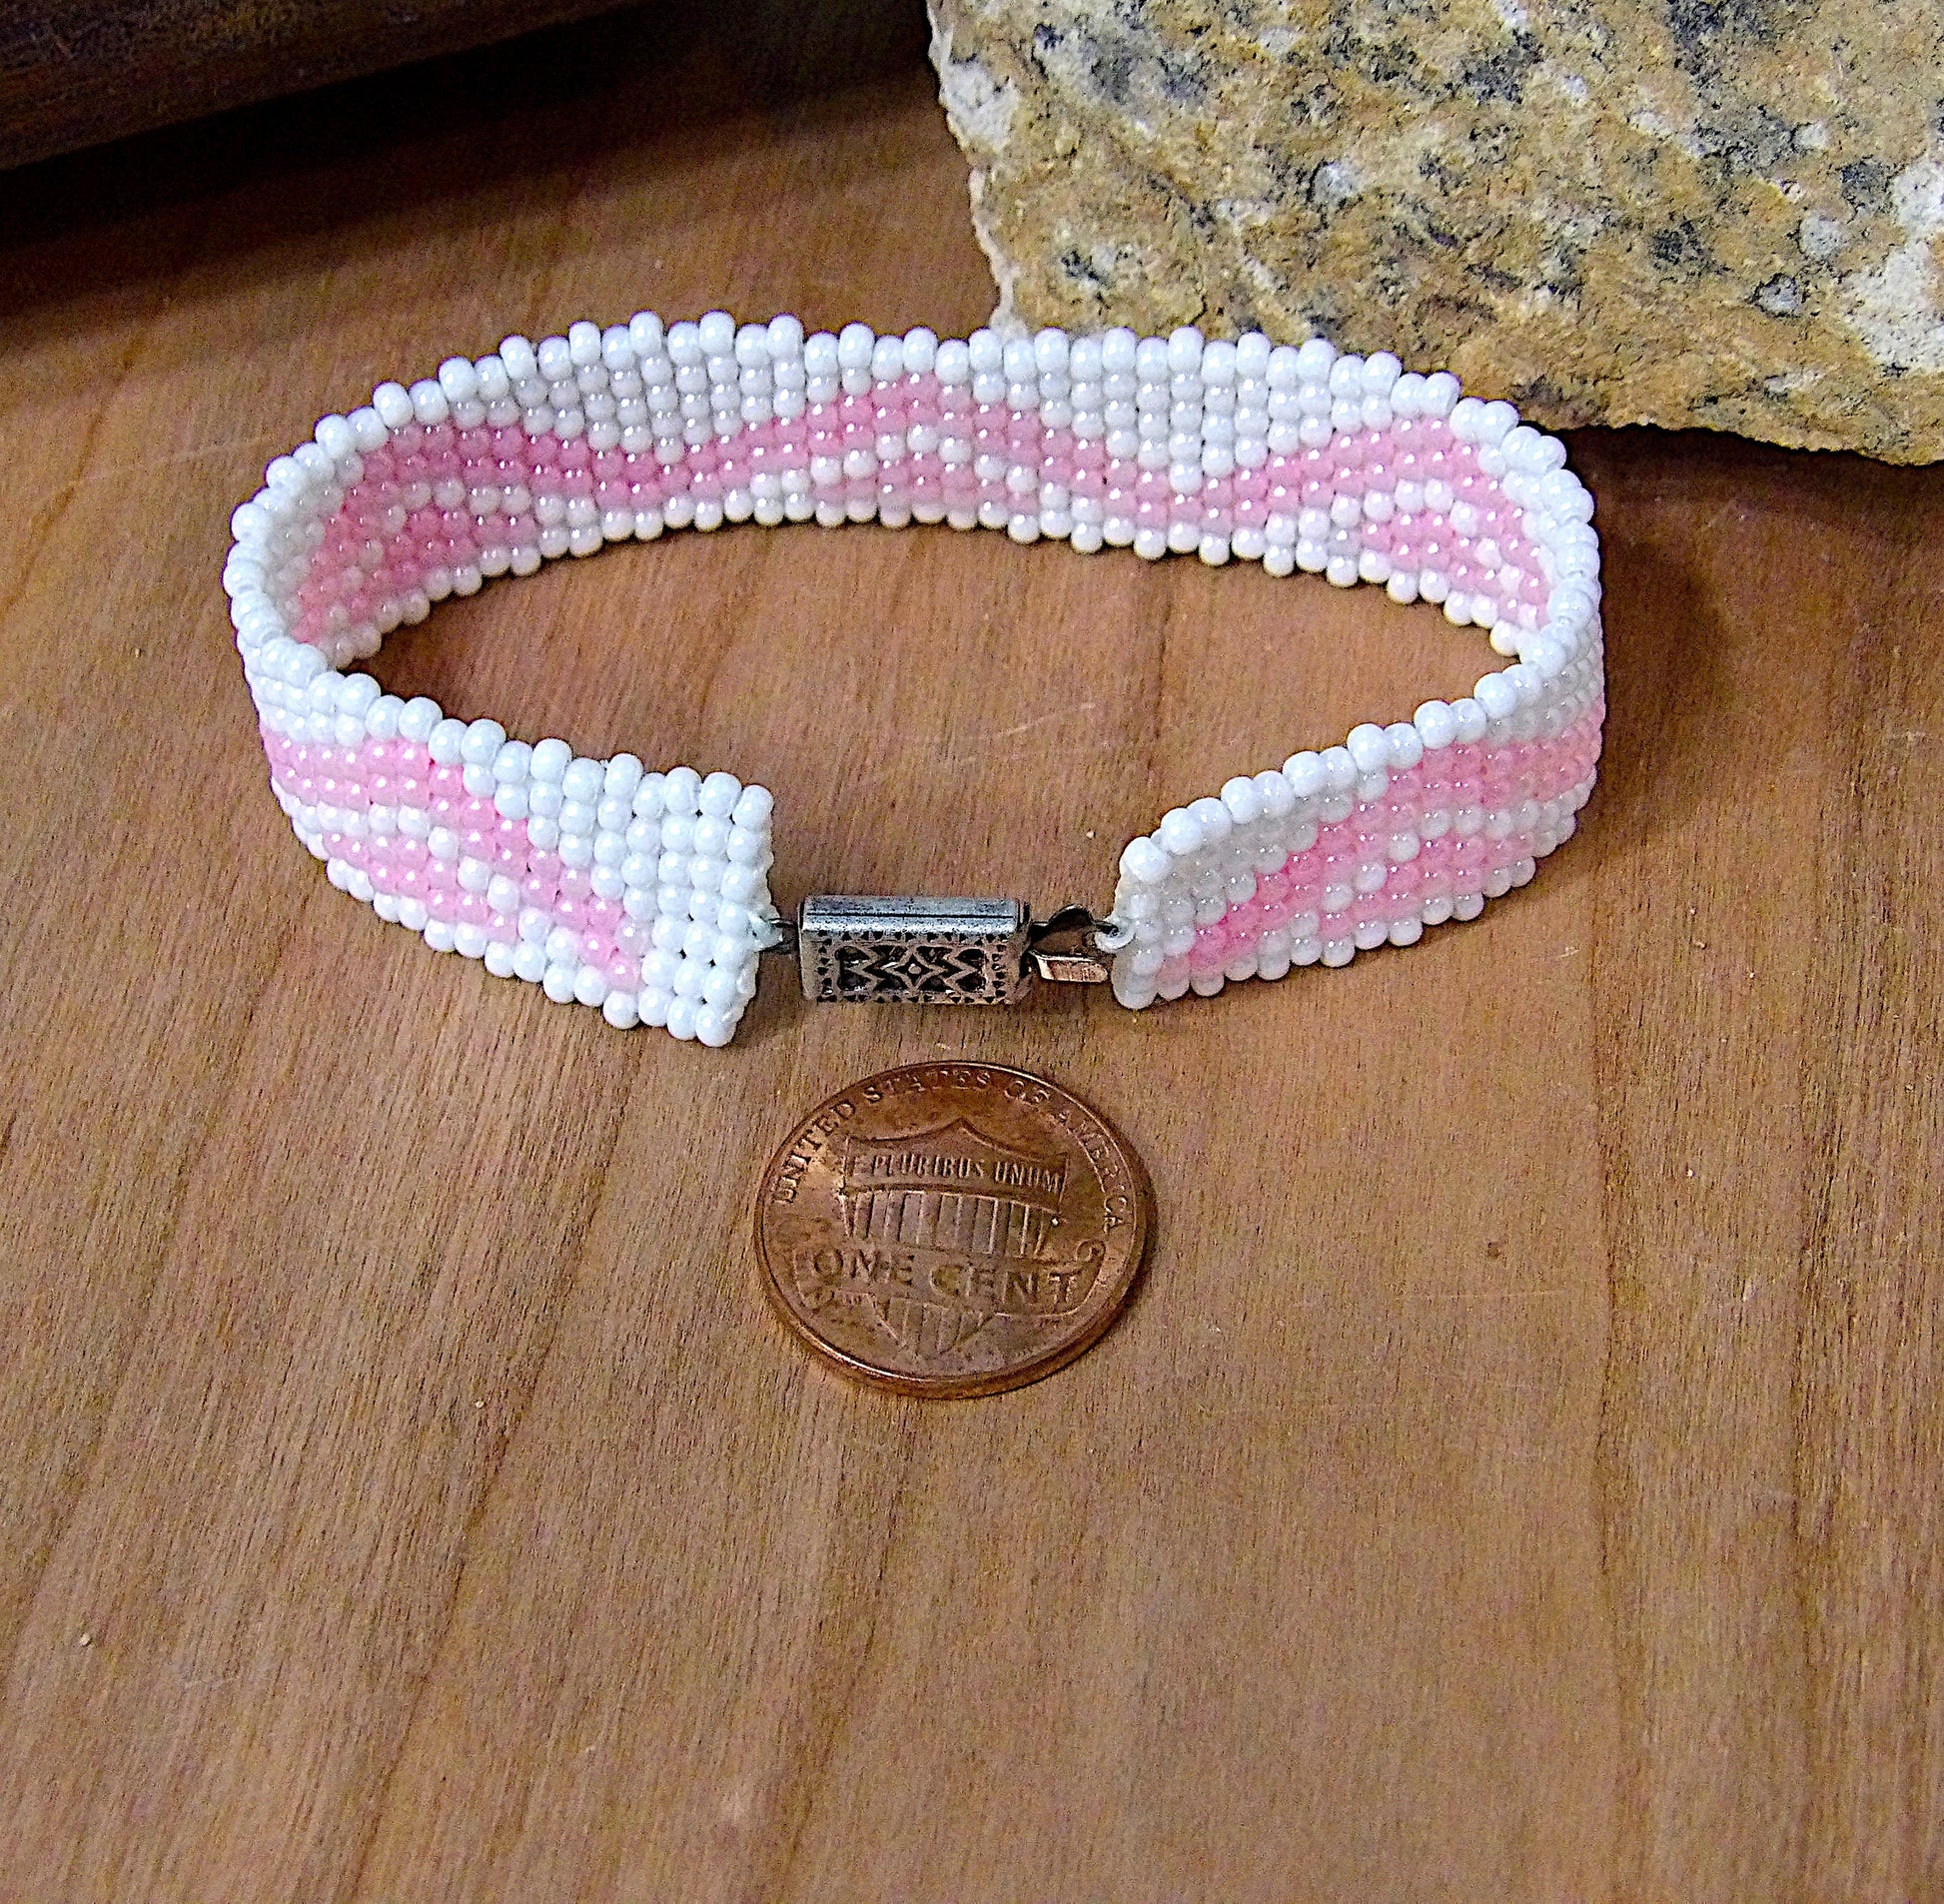 Wide Cuff Triangle Seed Bead Bracelet | 90s Aesthetic | Woven Beadwork | Colorful Boho Bracelet | One Of A Kind Gift | Boutique Jewelry Gift